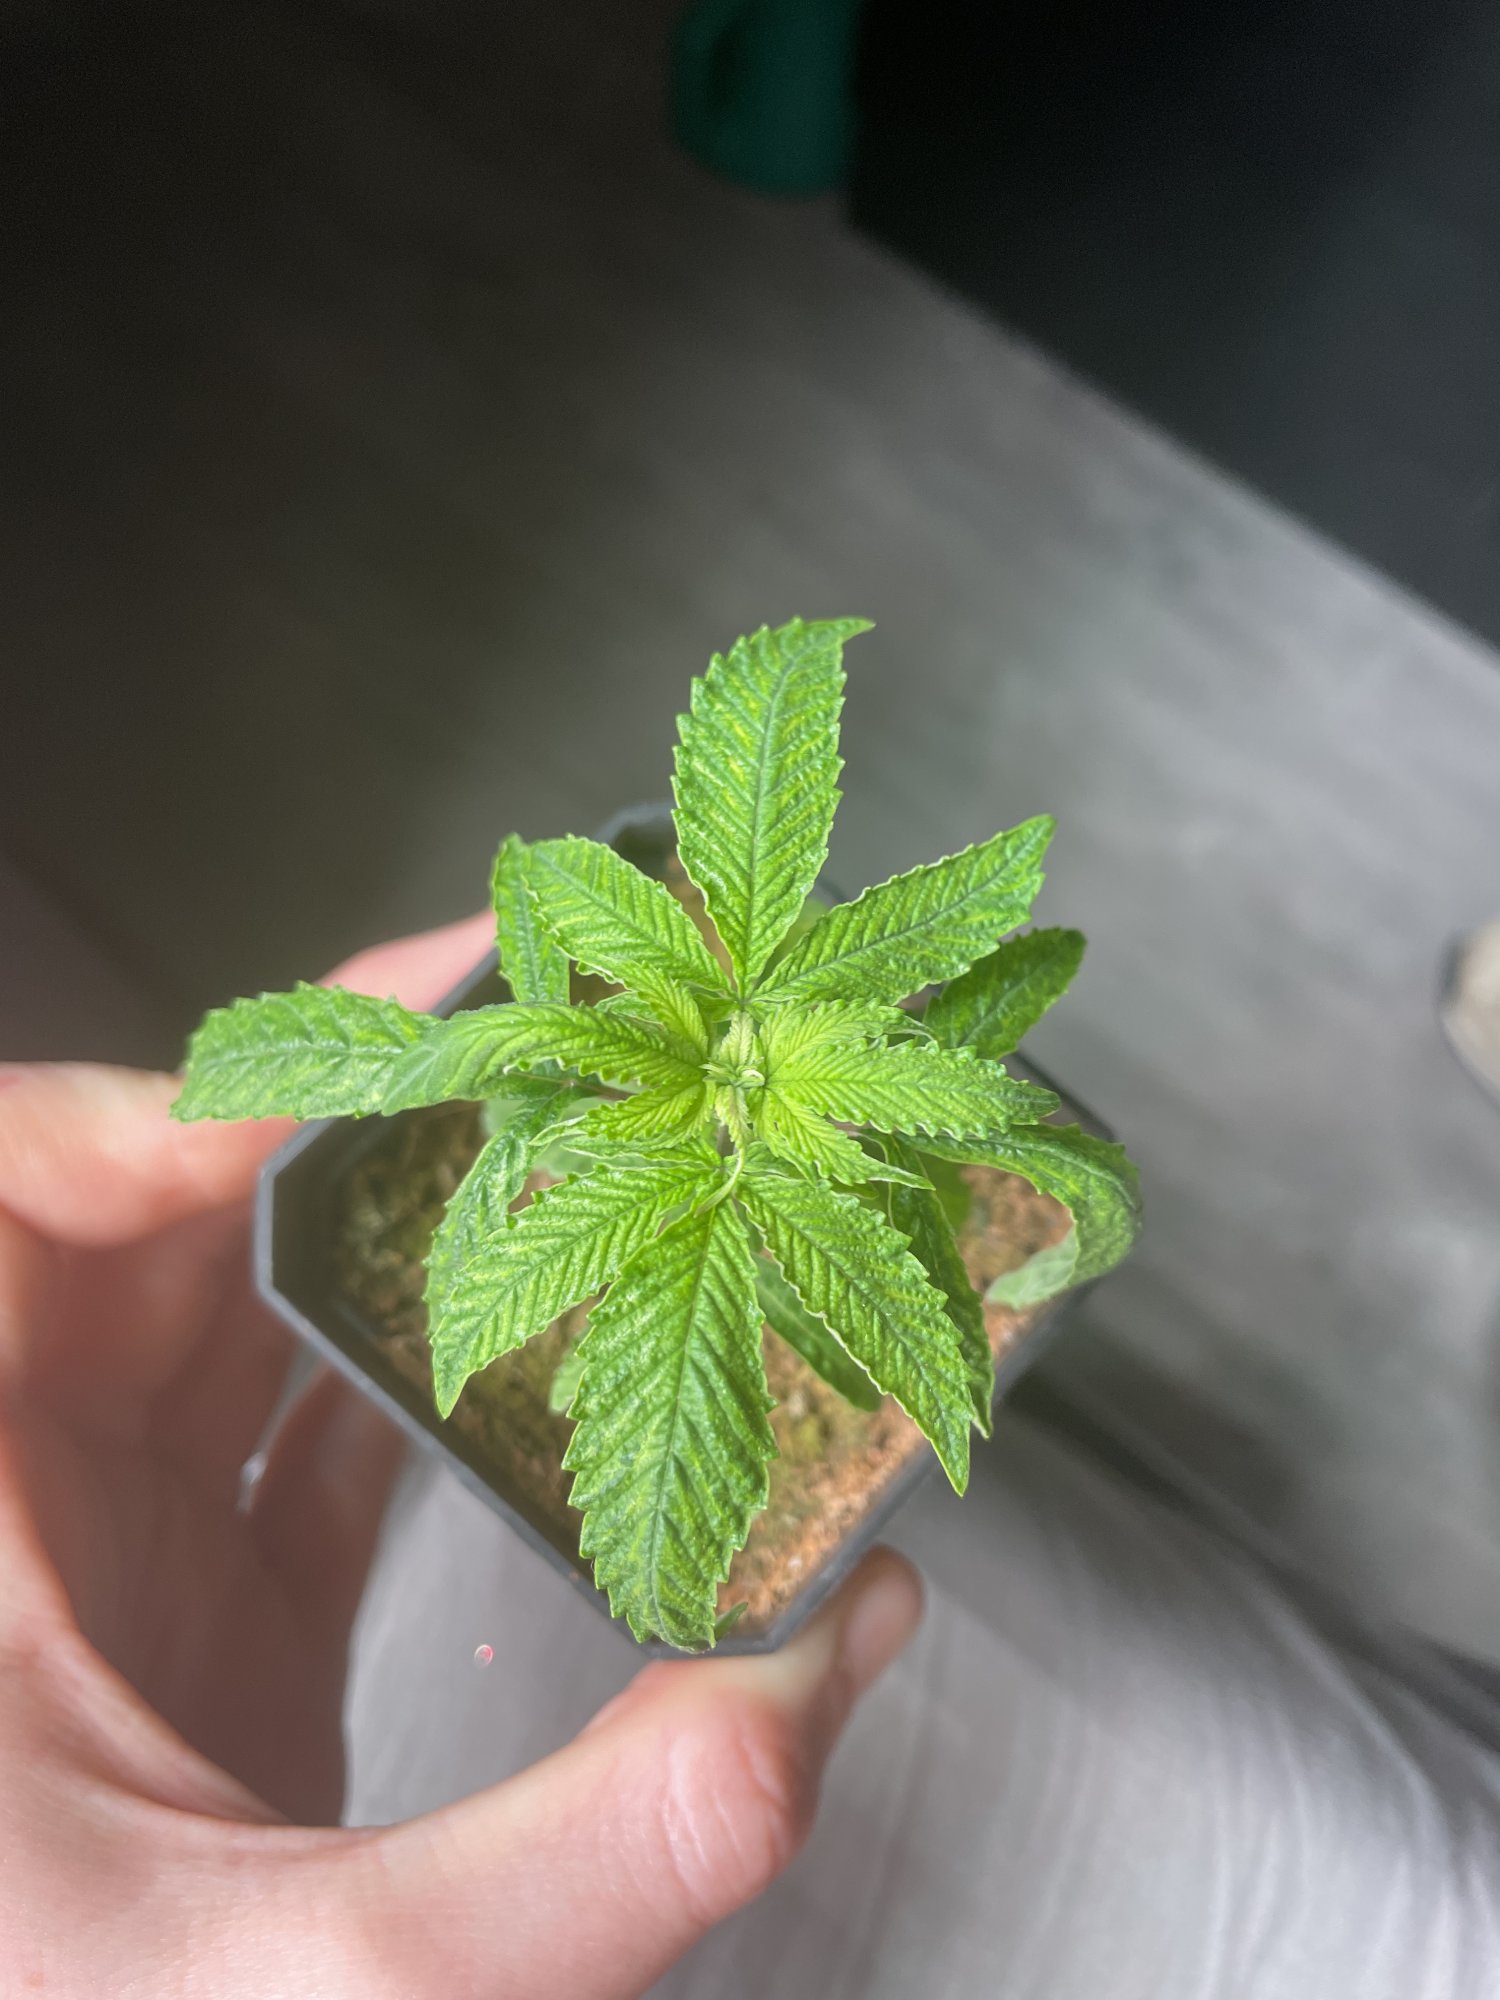 Problems with slow growth please help 3